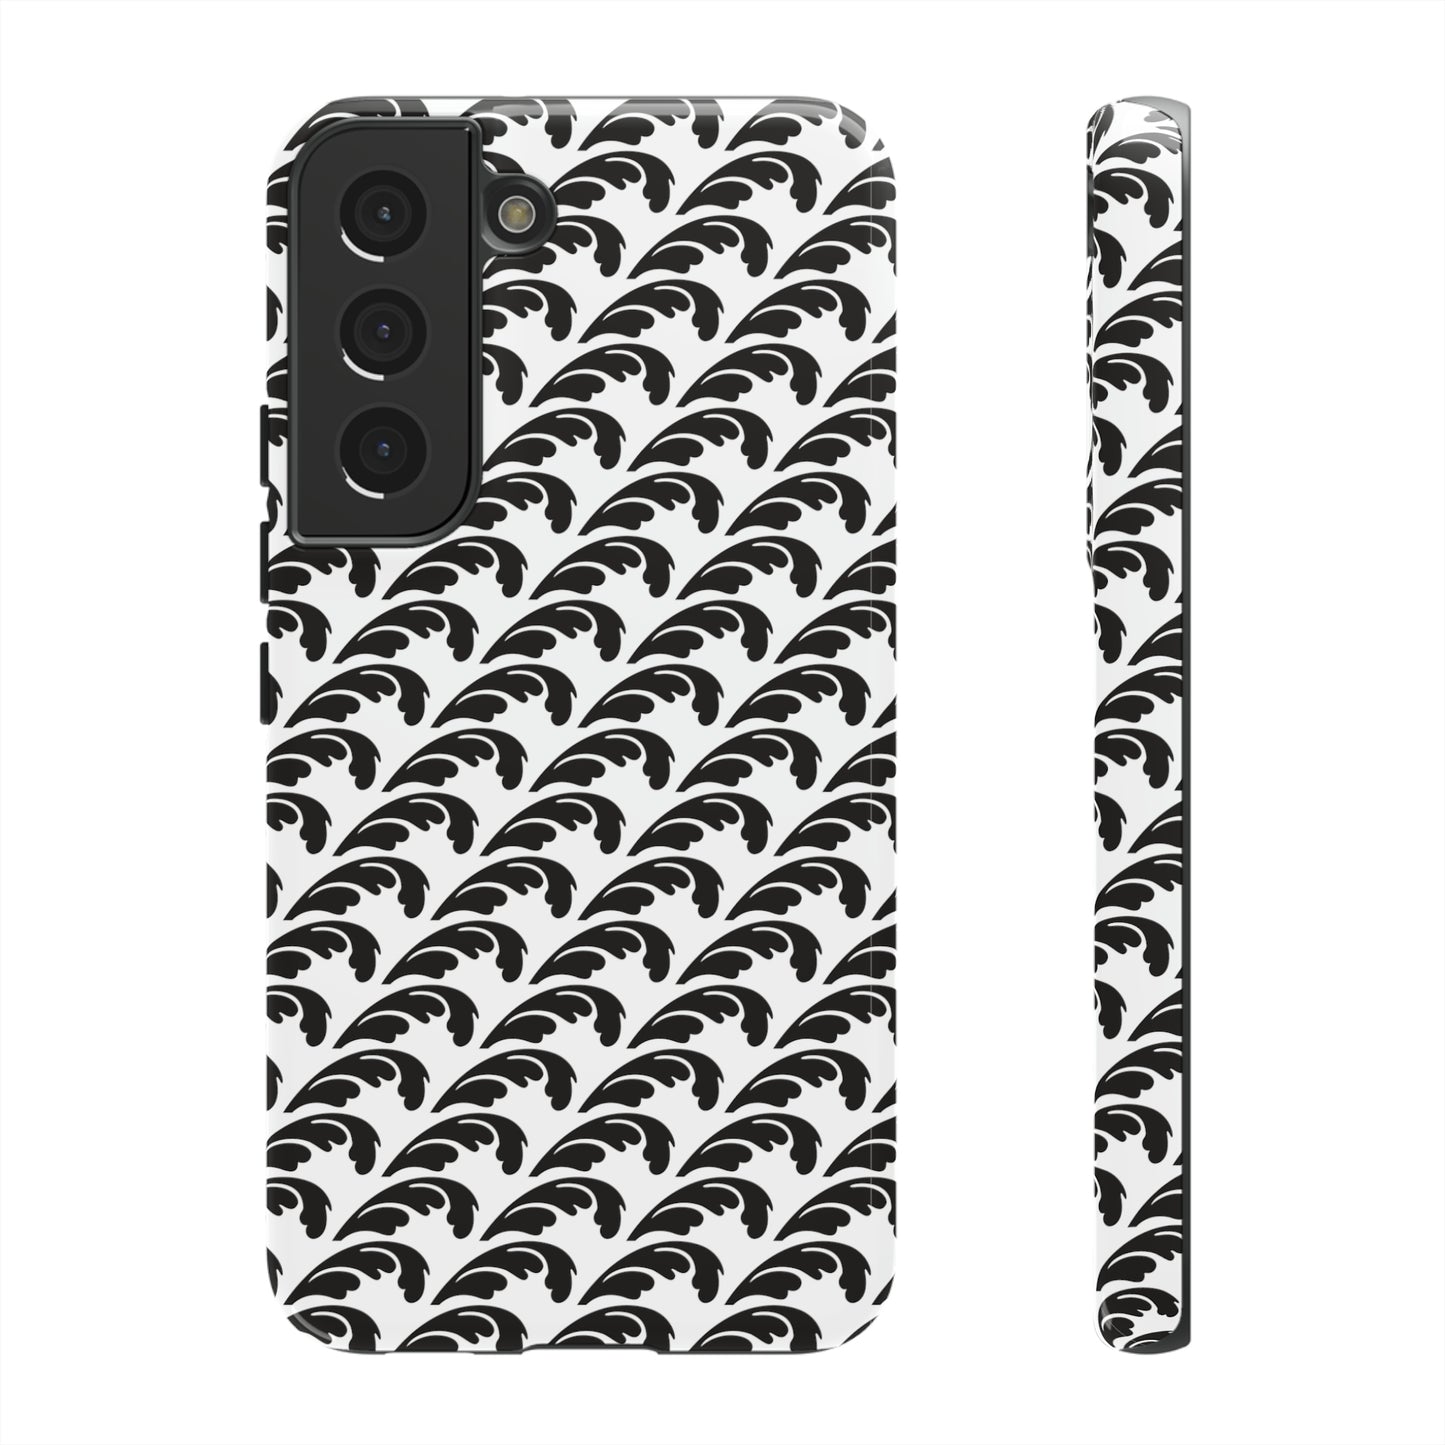 Beautiful Beloved One - Tough Phone Cases - blk/wht